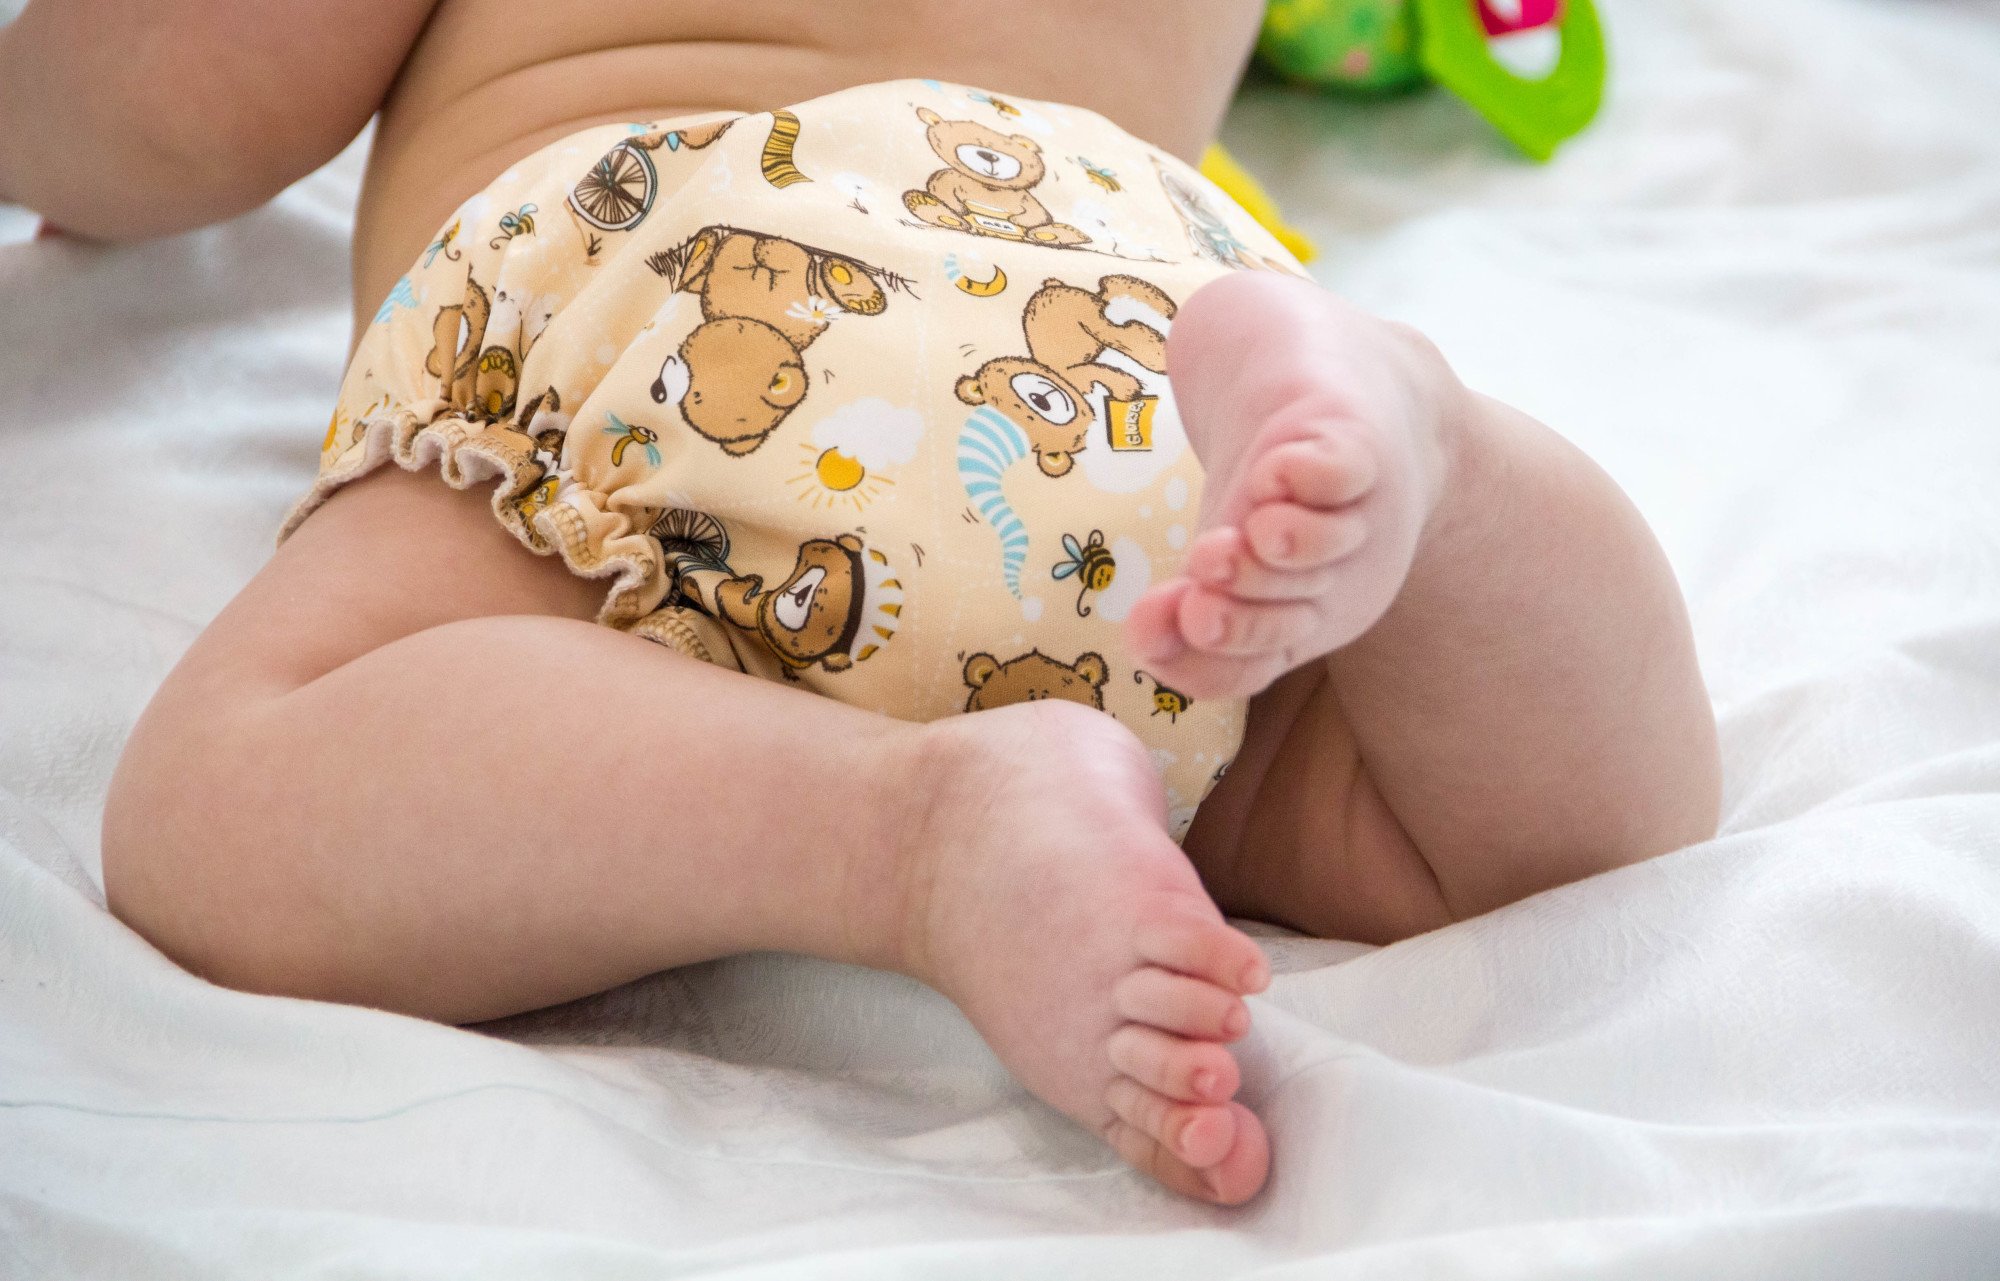 Are you interested in switching your little one to cloth diapers? Click here for a guide to the different types of cloth diapers to find out your options.